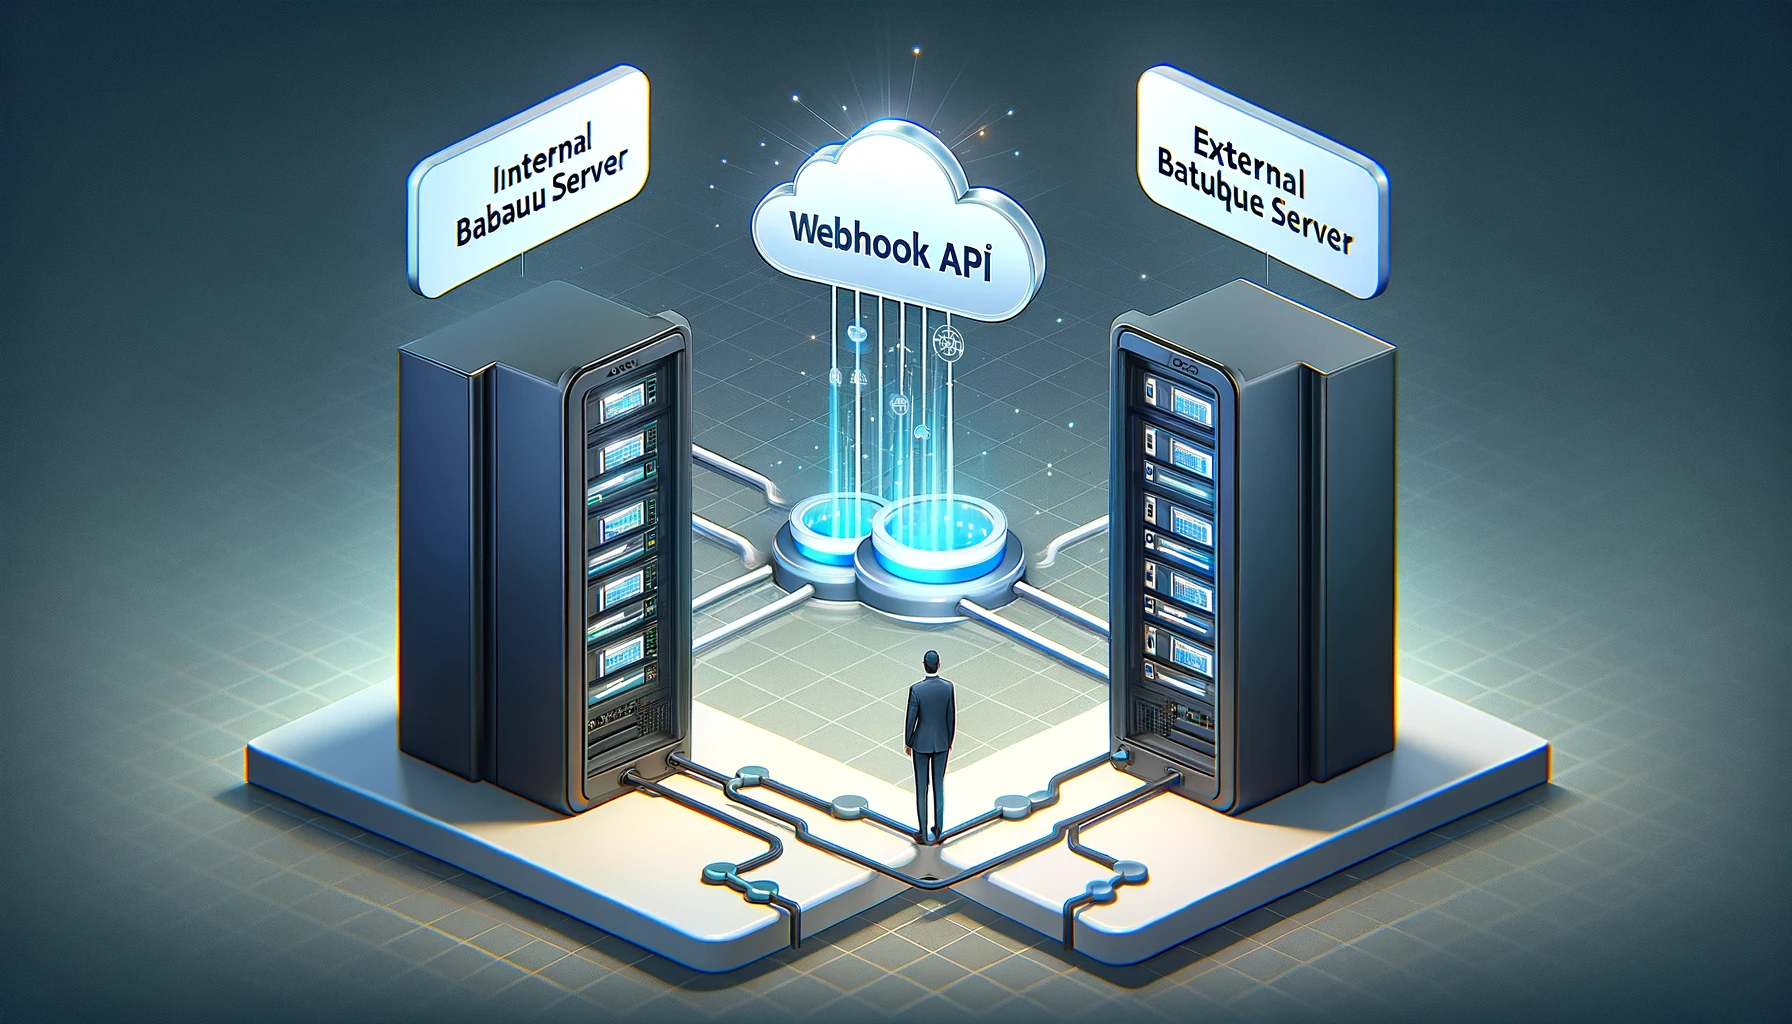 DALL·E 2023-11-15 02.02.30 - An image illustrating the concept of connecting an 'Internal Tableau Server' with an 'External Tableau Server' using Webhook API for data synchronizat.png